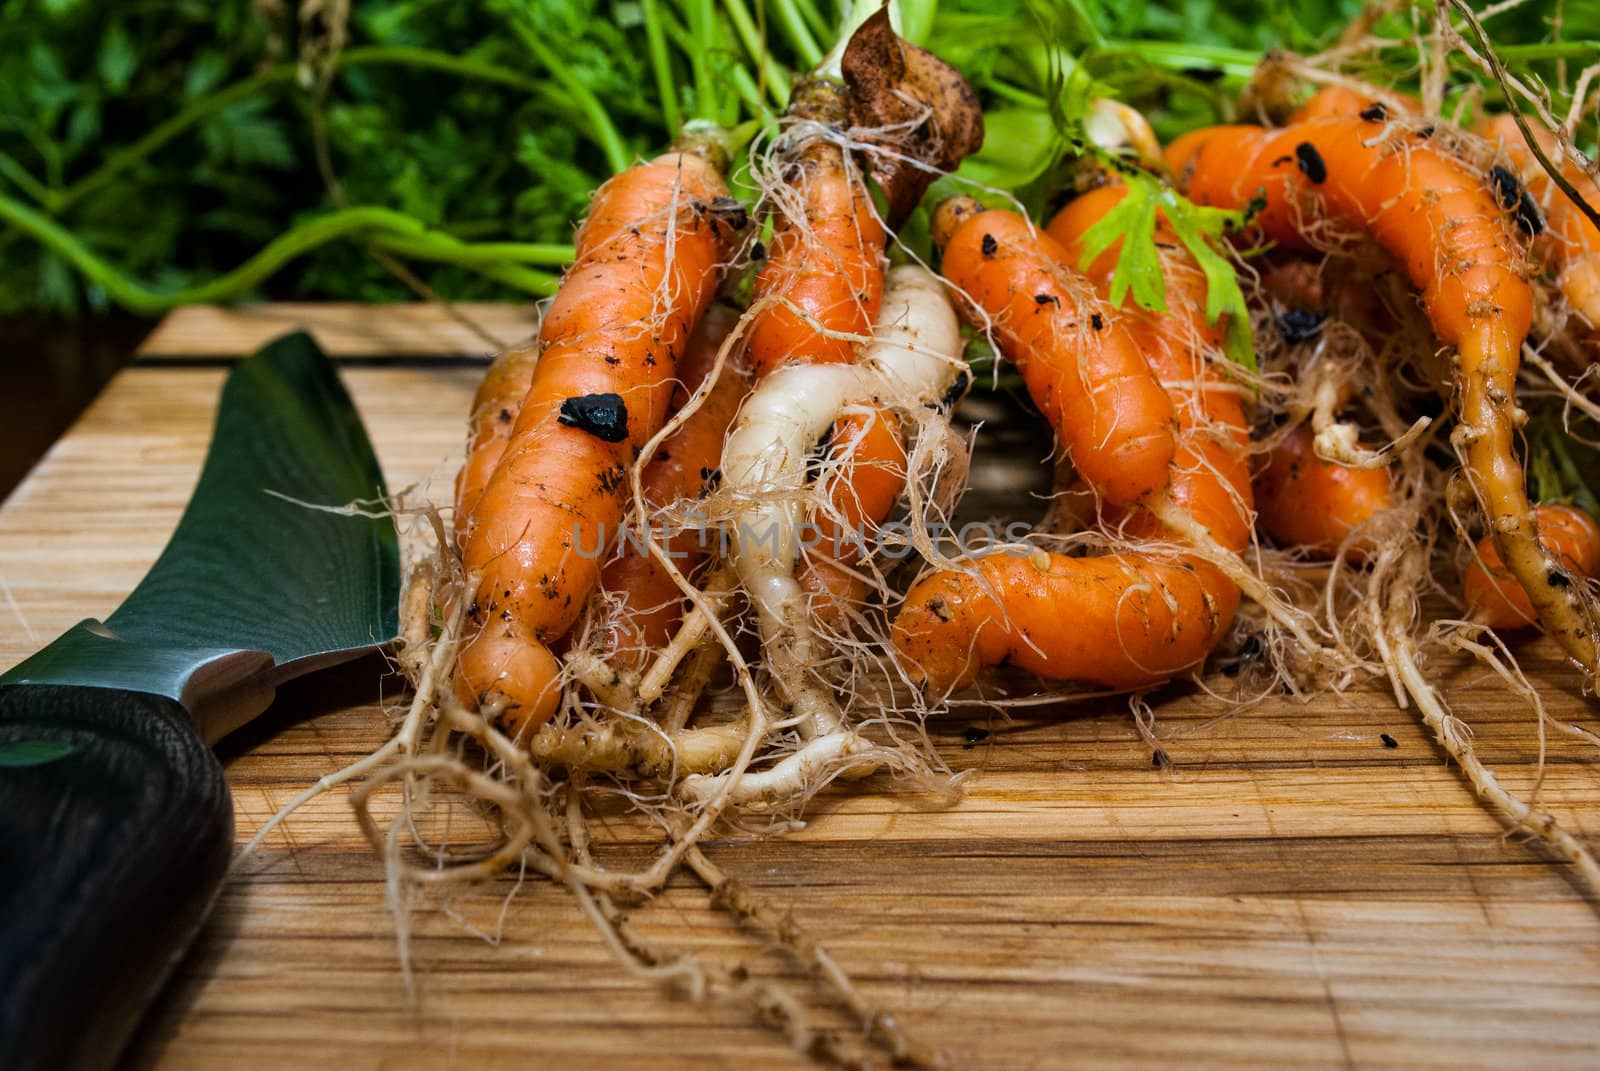 Photograph of home grown carrots waiting to be cut on a wooden cutting board.